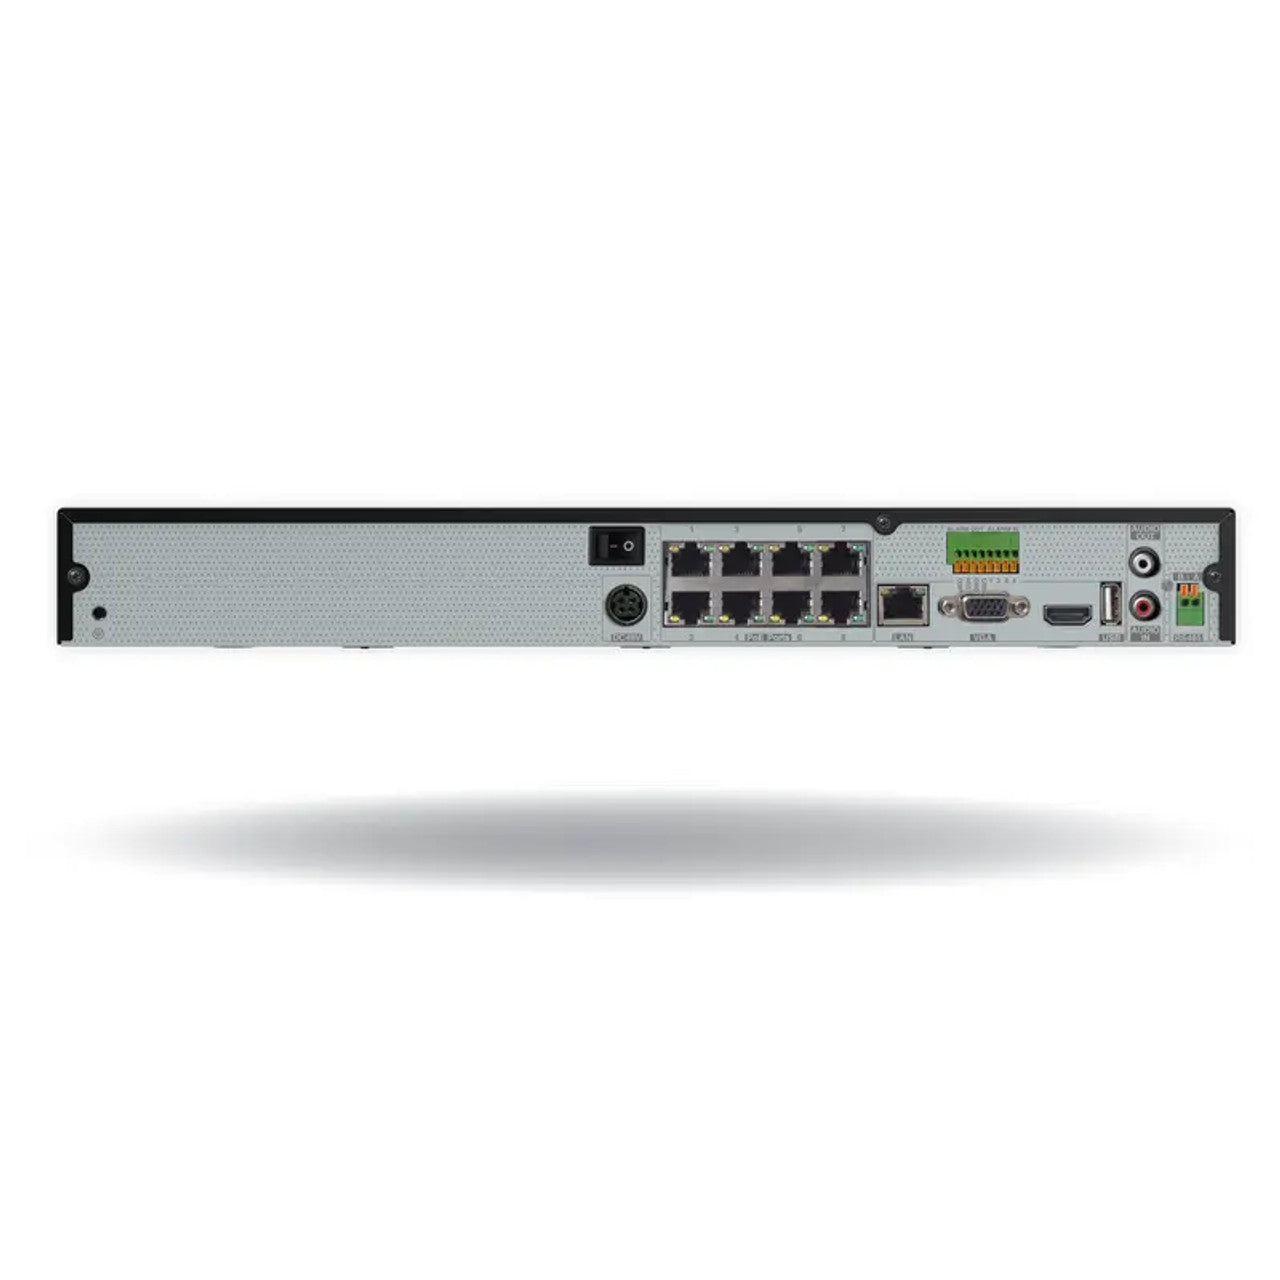 Digital Watchdog DW-VG4128T8P VMAX IP G4 8 Channel PoE NVR with 4 bonus channels with 8TB Hard Drive, 12-Channel